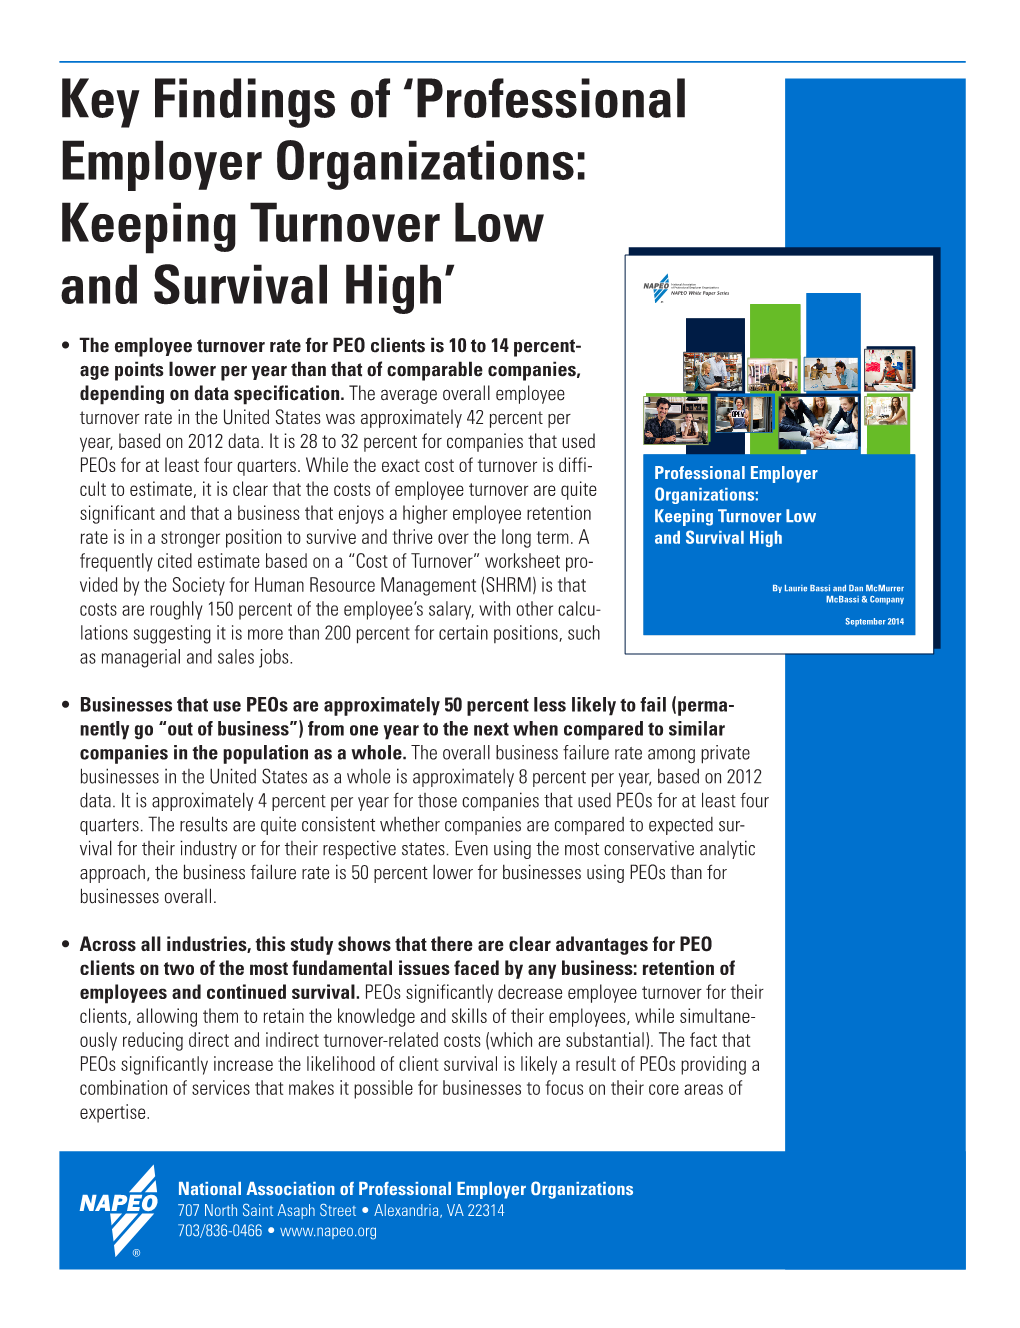 Professional Employer Organizations: Keeping Turnover Low and Survival